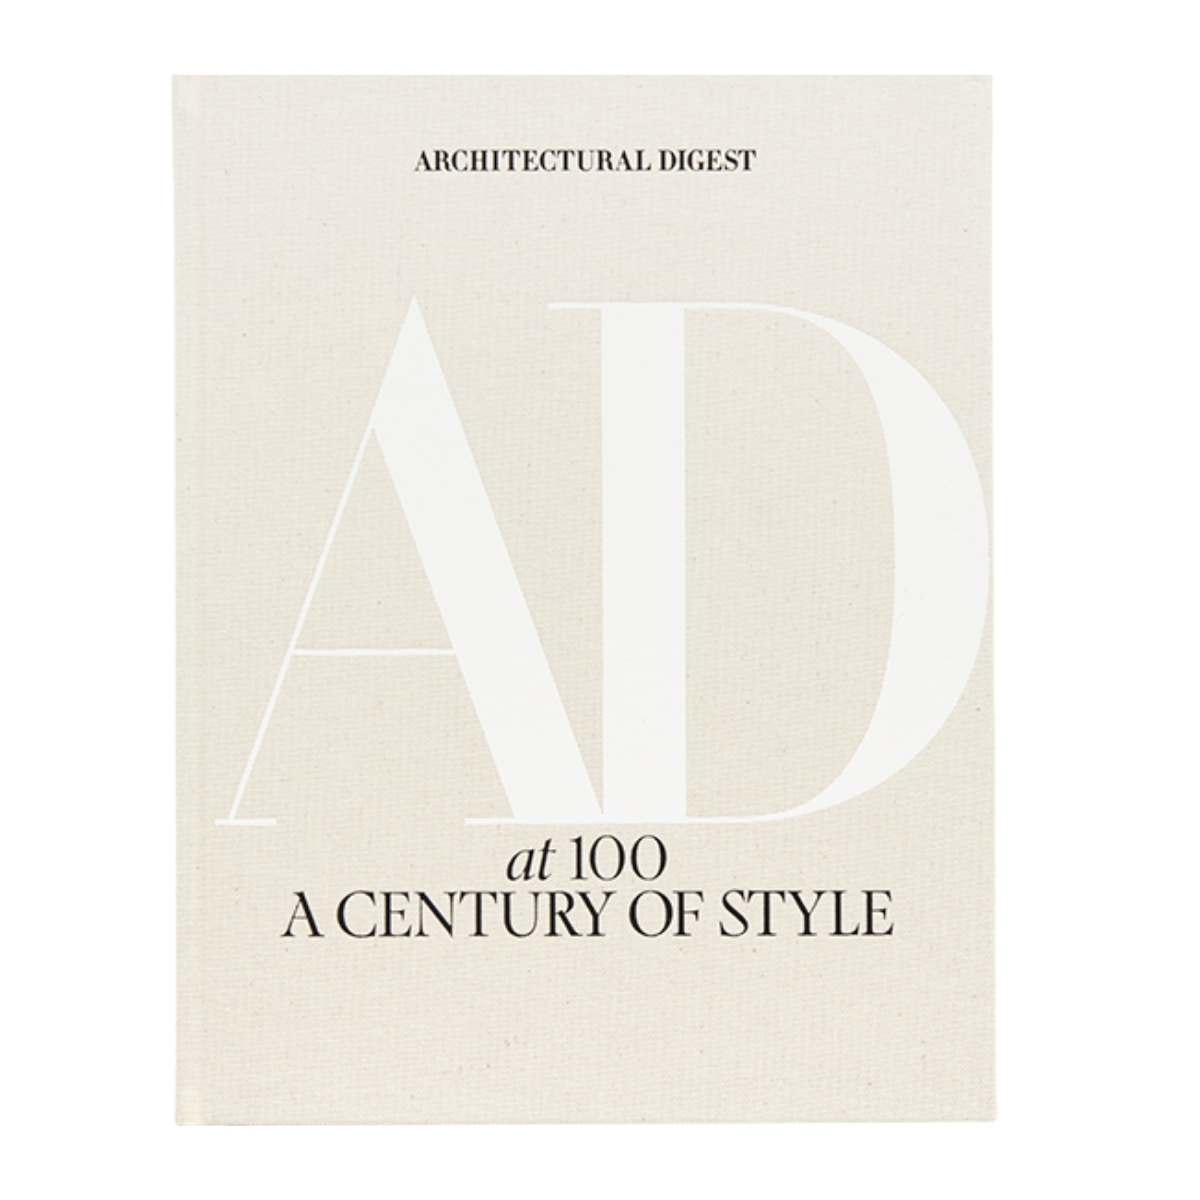 "Architectural Digest at 100: A Century of Style"